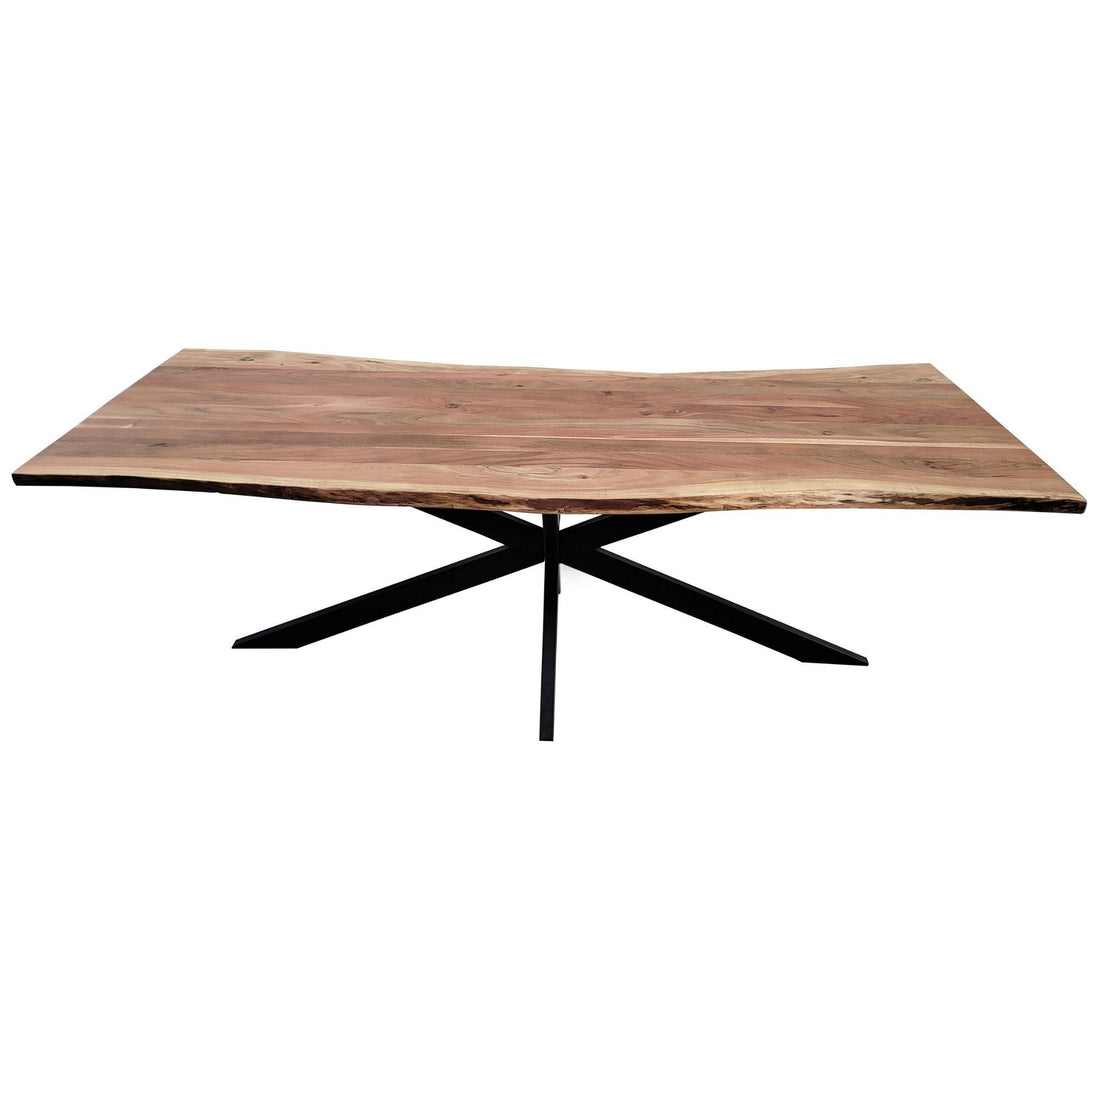 Buy Lantana Dining Table 240cm Live Edge Solid Acacia Timber Wood Metal Leg -Natural discounted | Products On Sale Australia